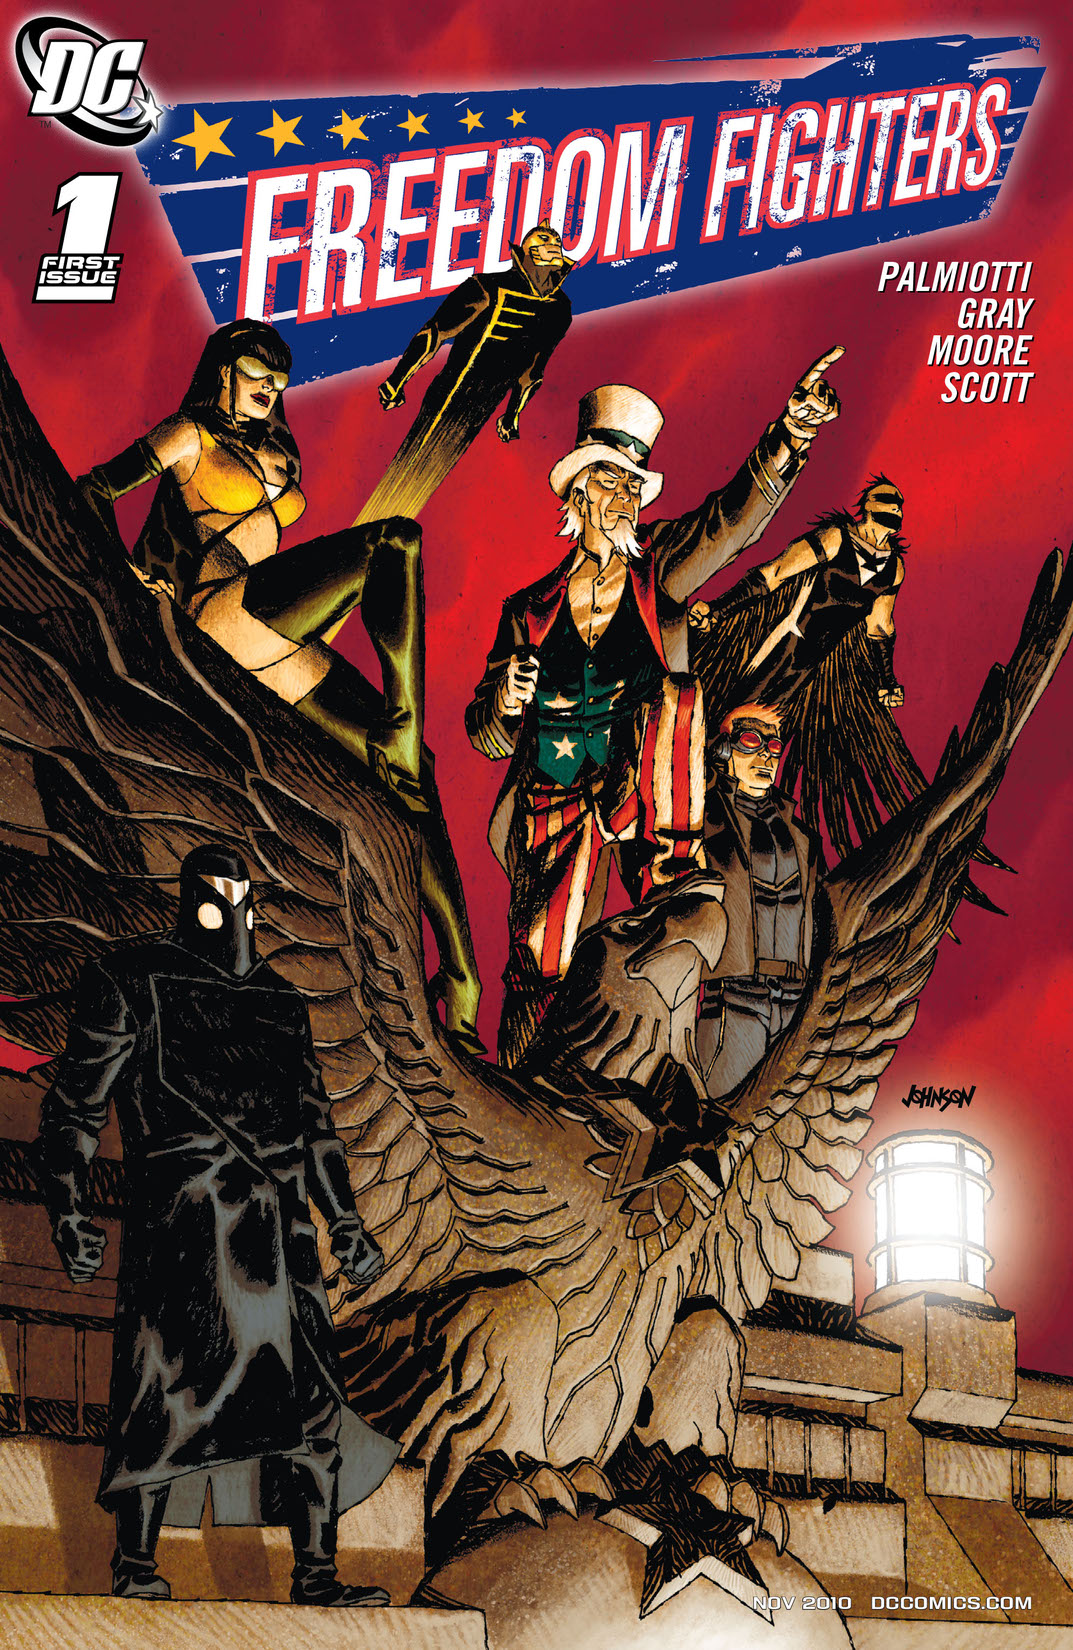 Freedom Fighters (2010-) #1 preview images